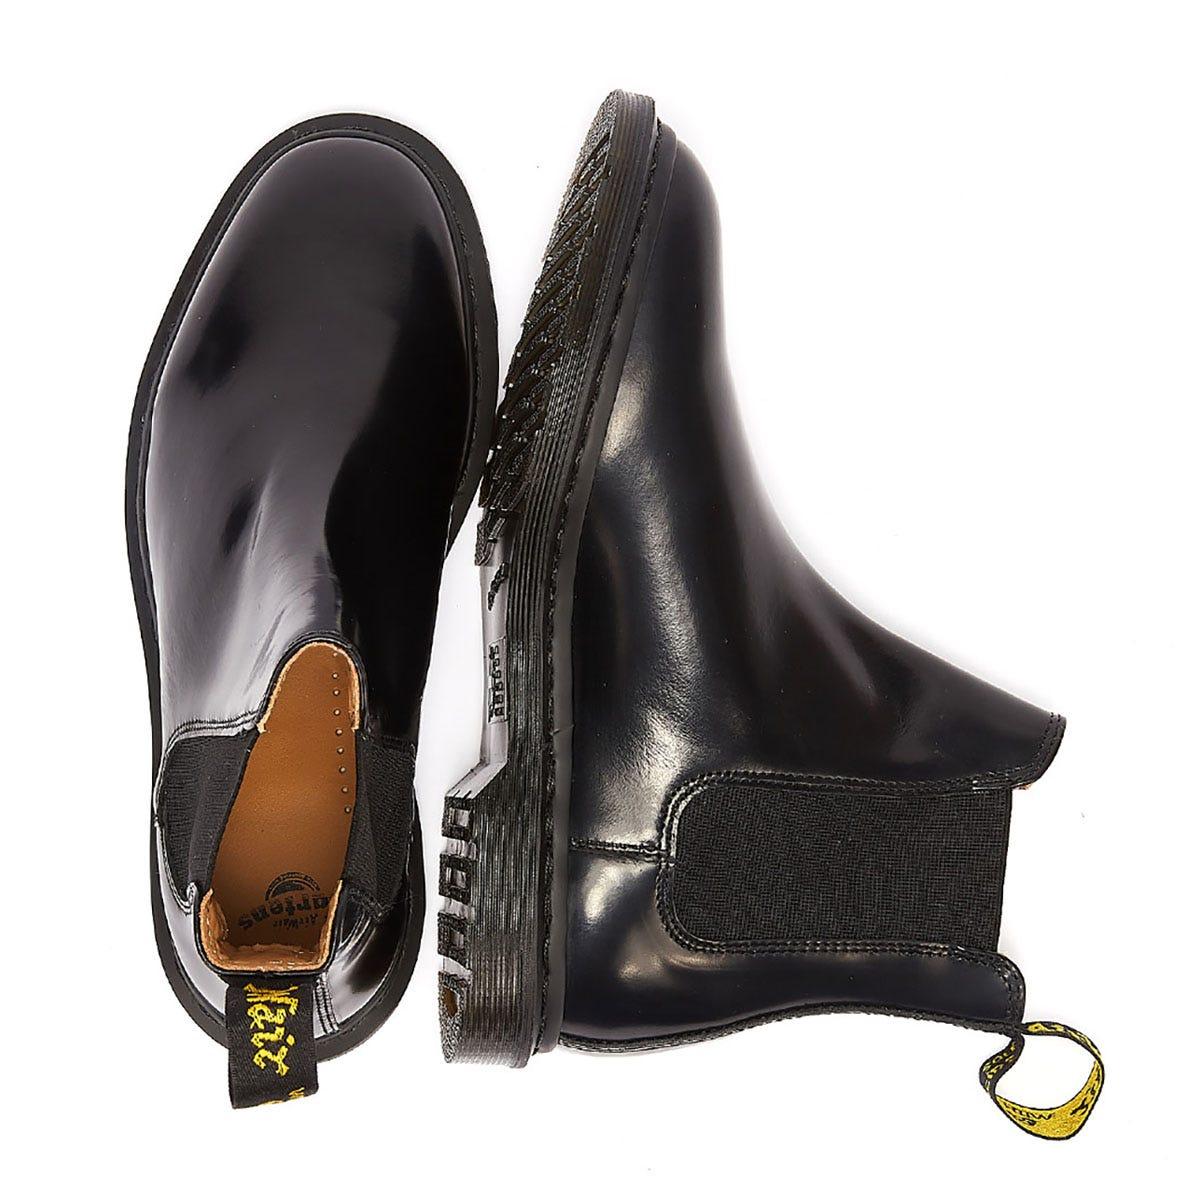 Martens Graeme Ii Polished Smooth Leather Chelsea Boots In, 55% OFF